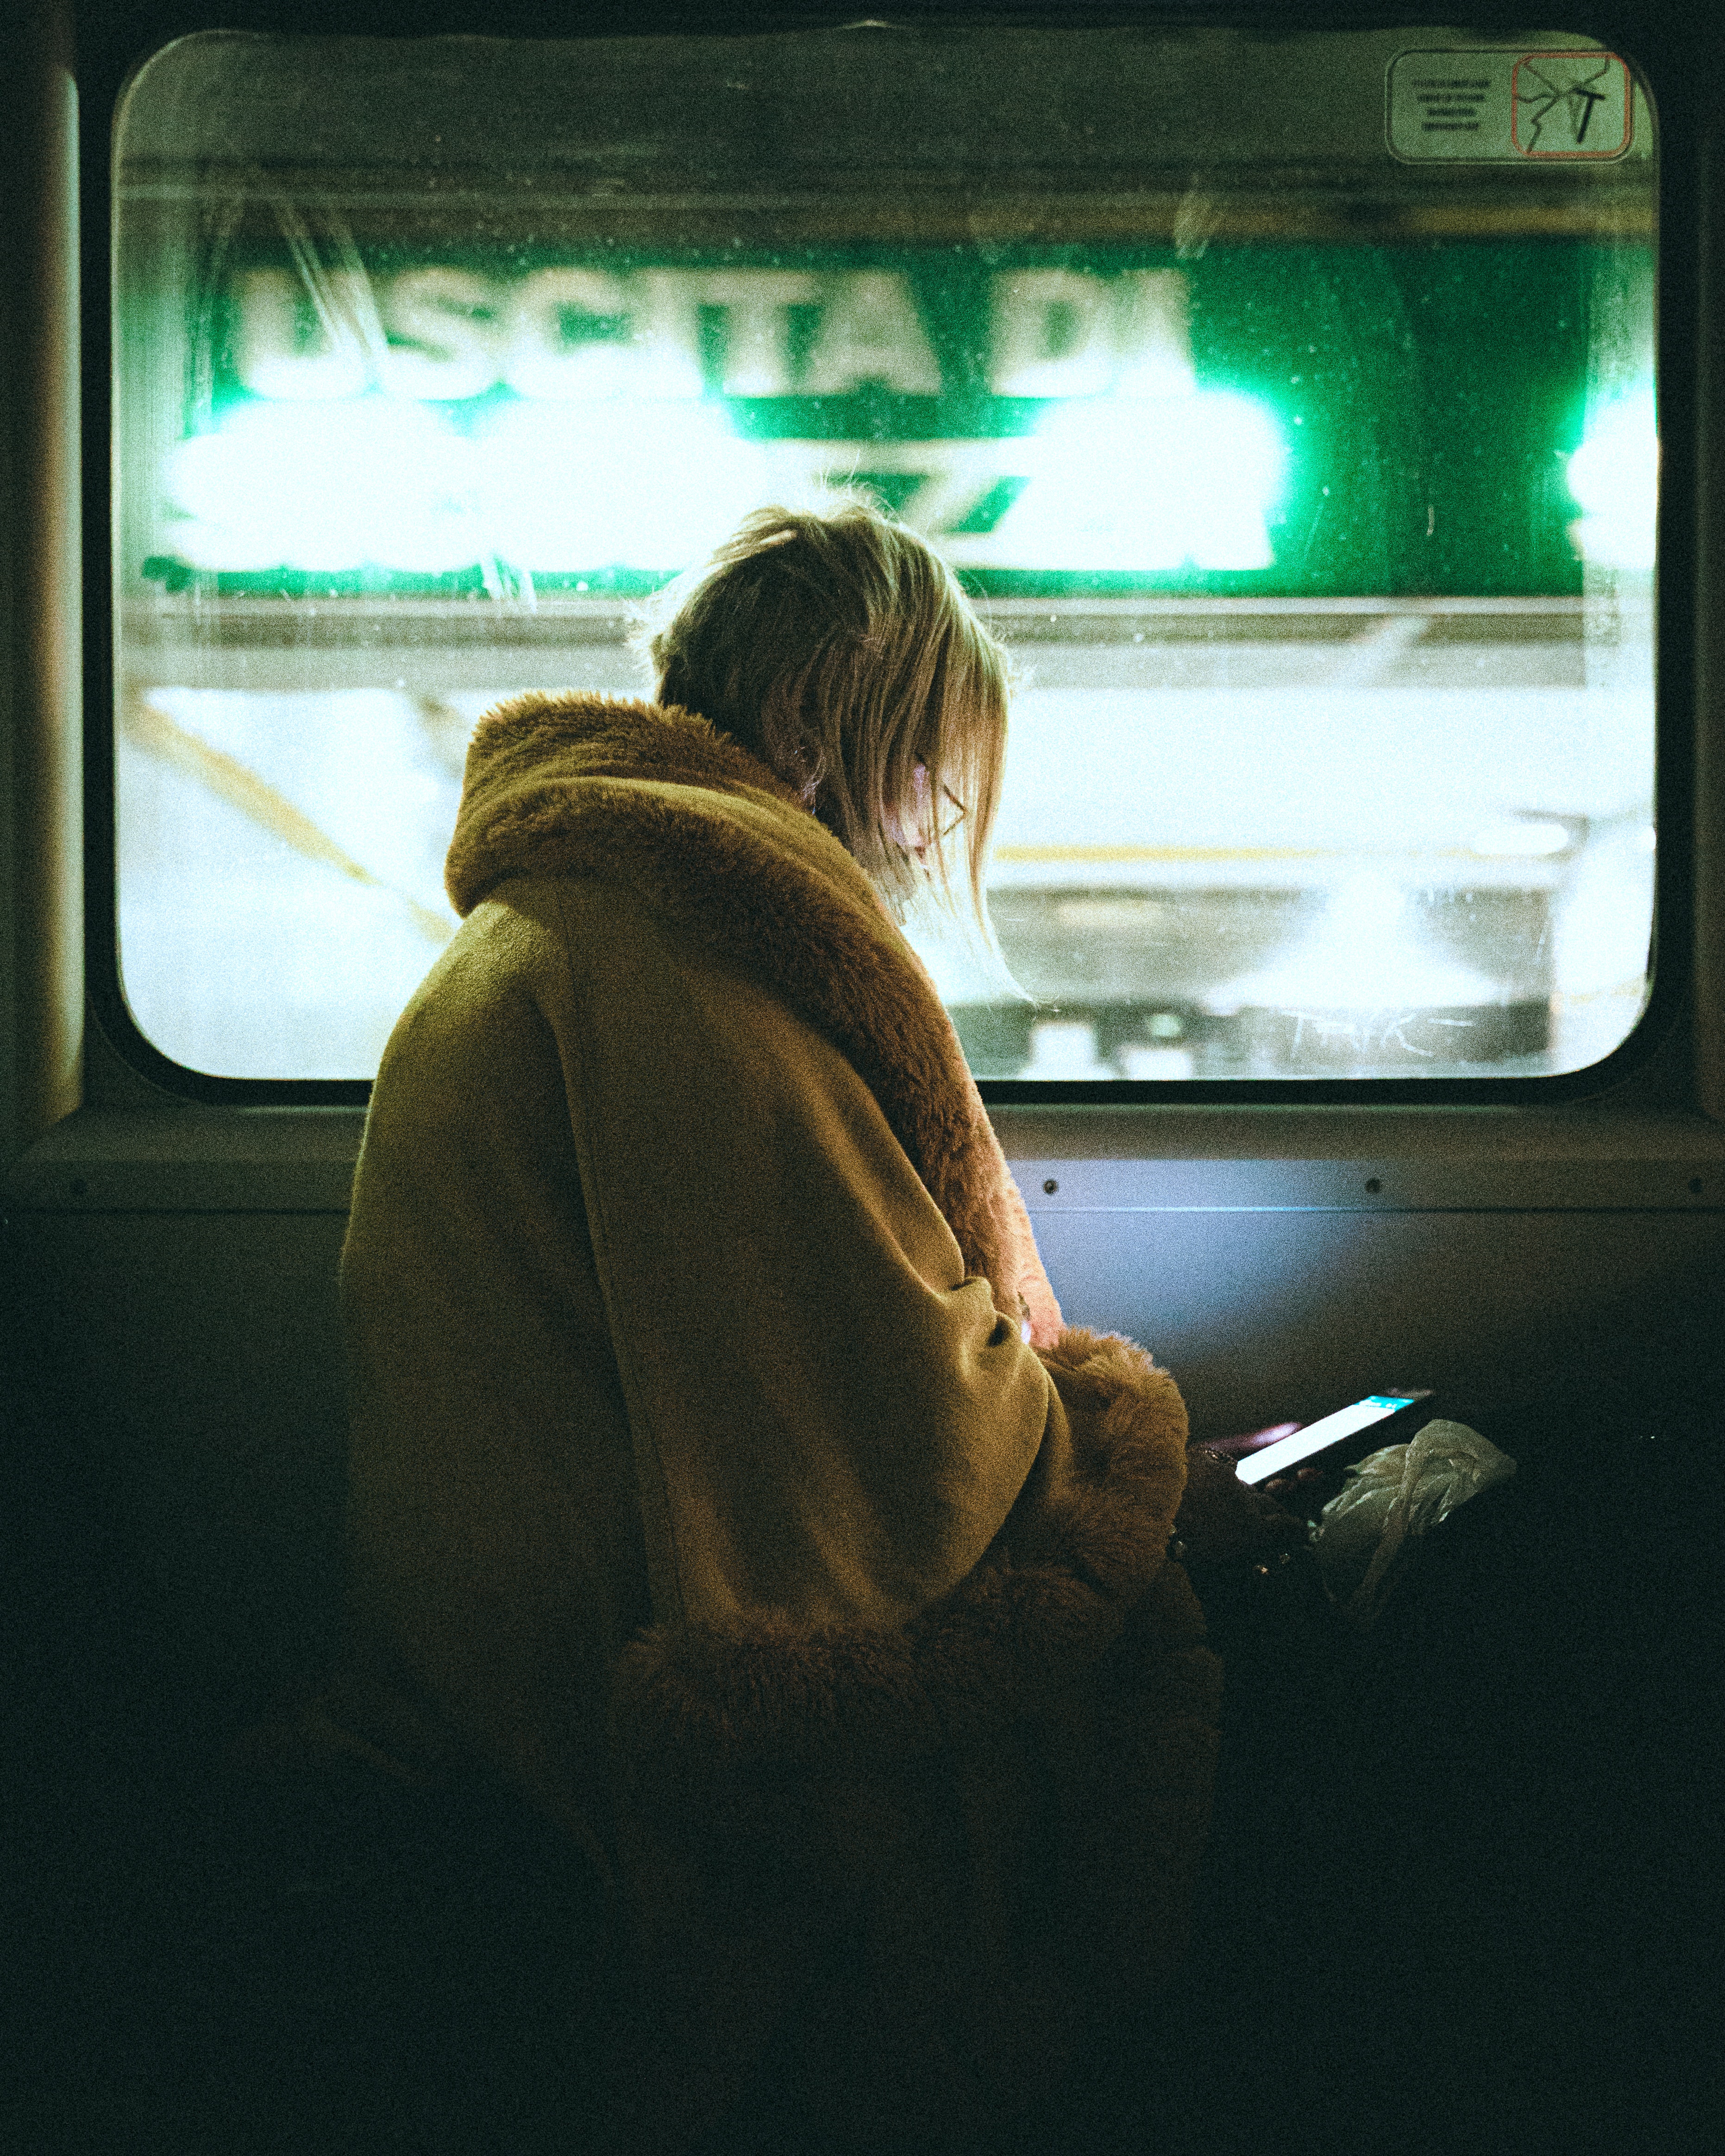 A woman looking at her cellphone in a dark train cabin | Source: Pexels